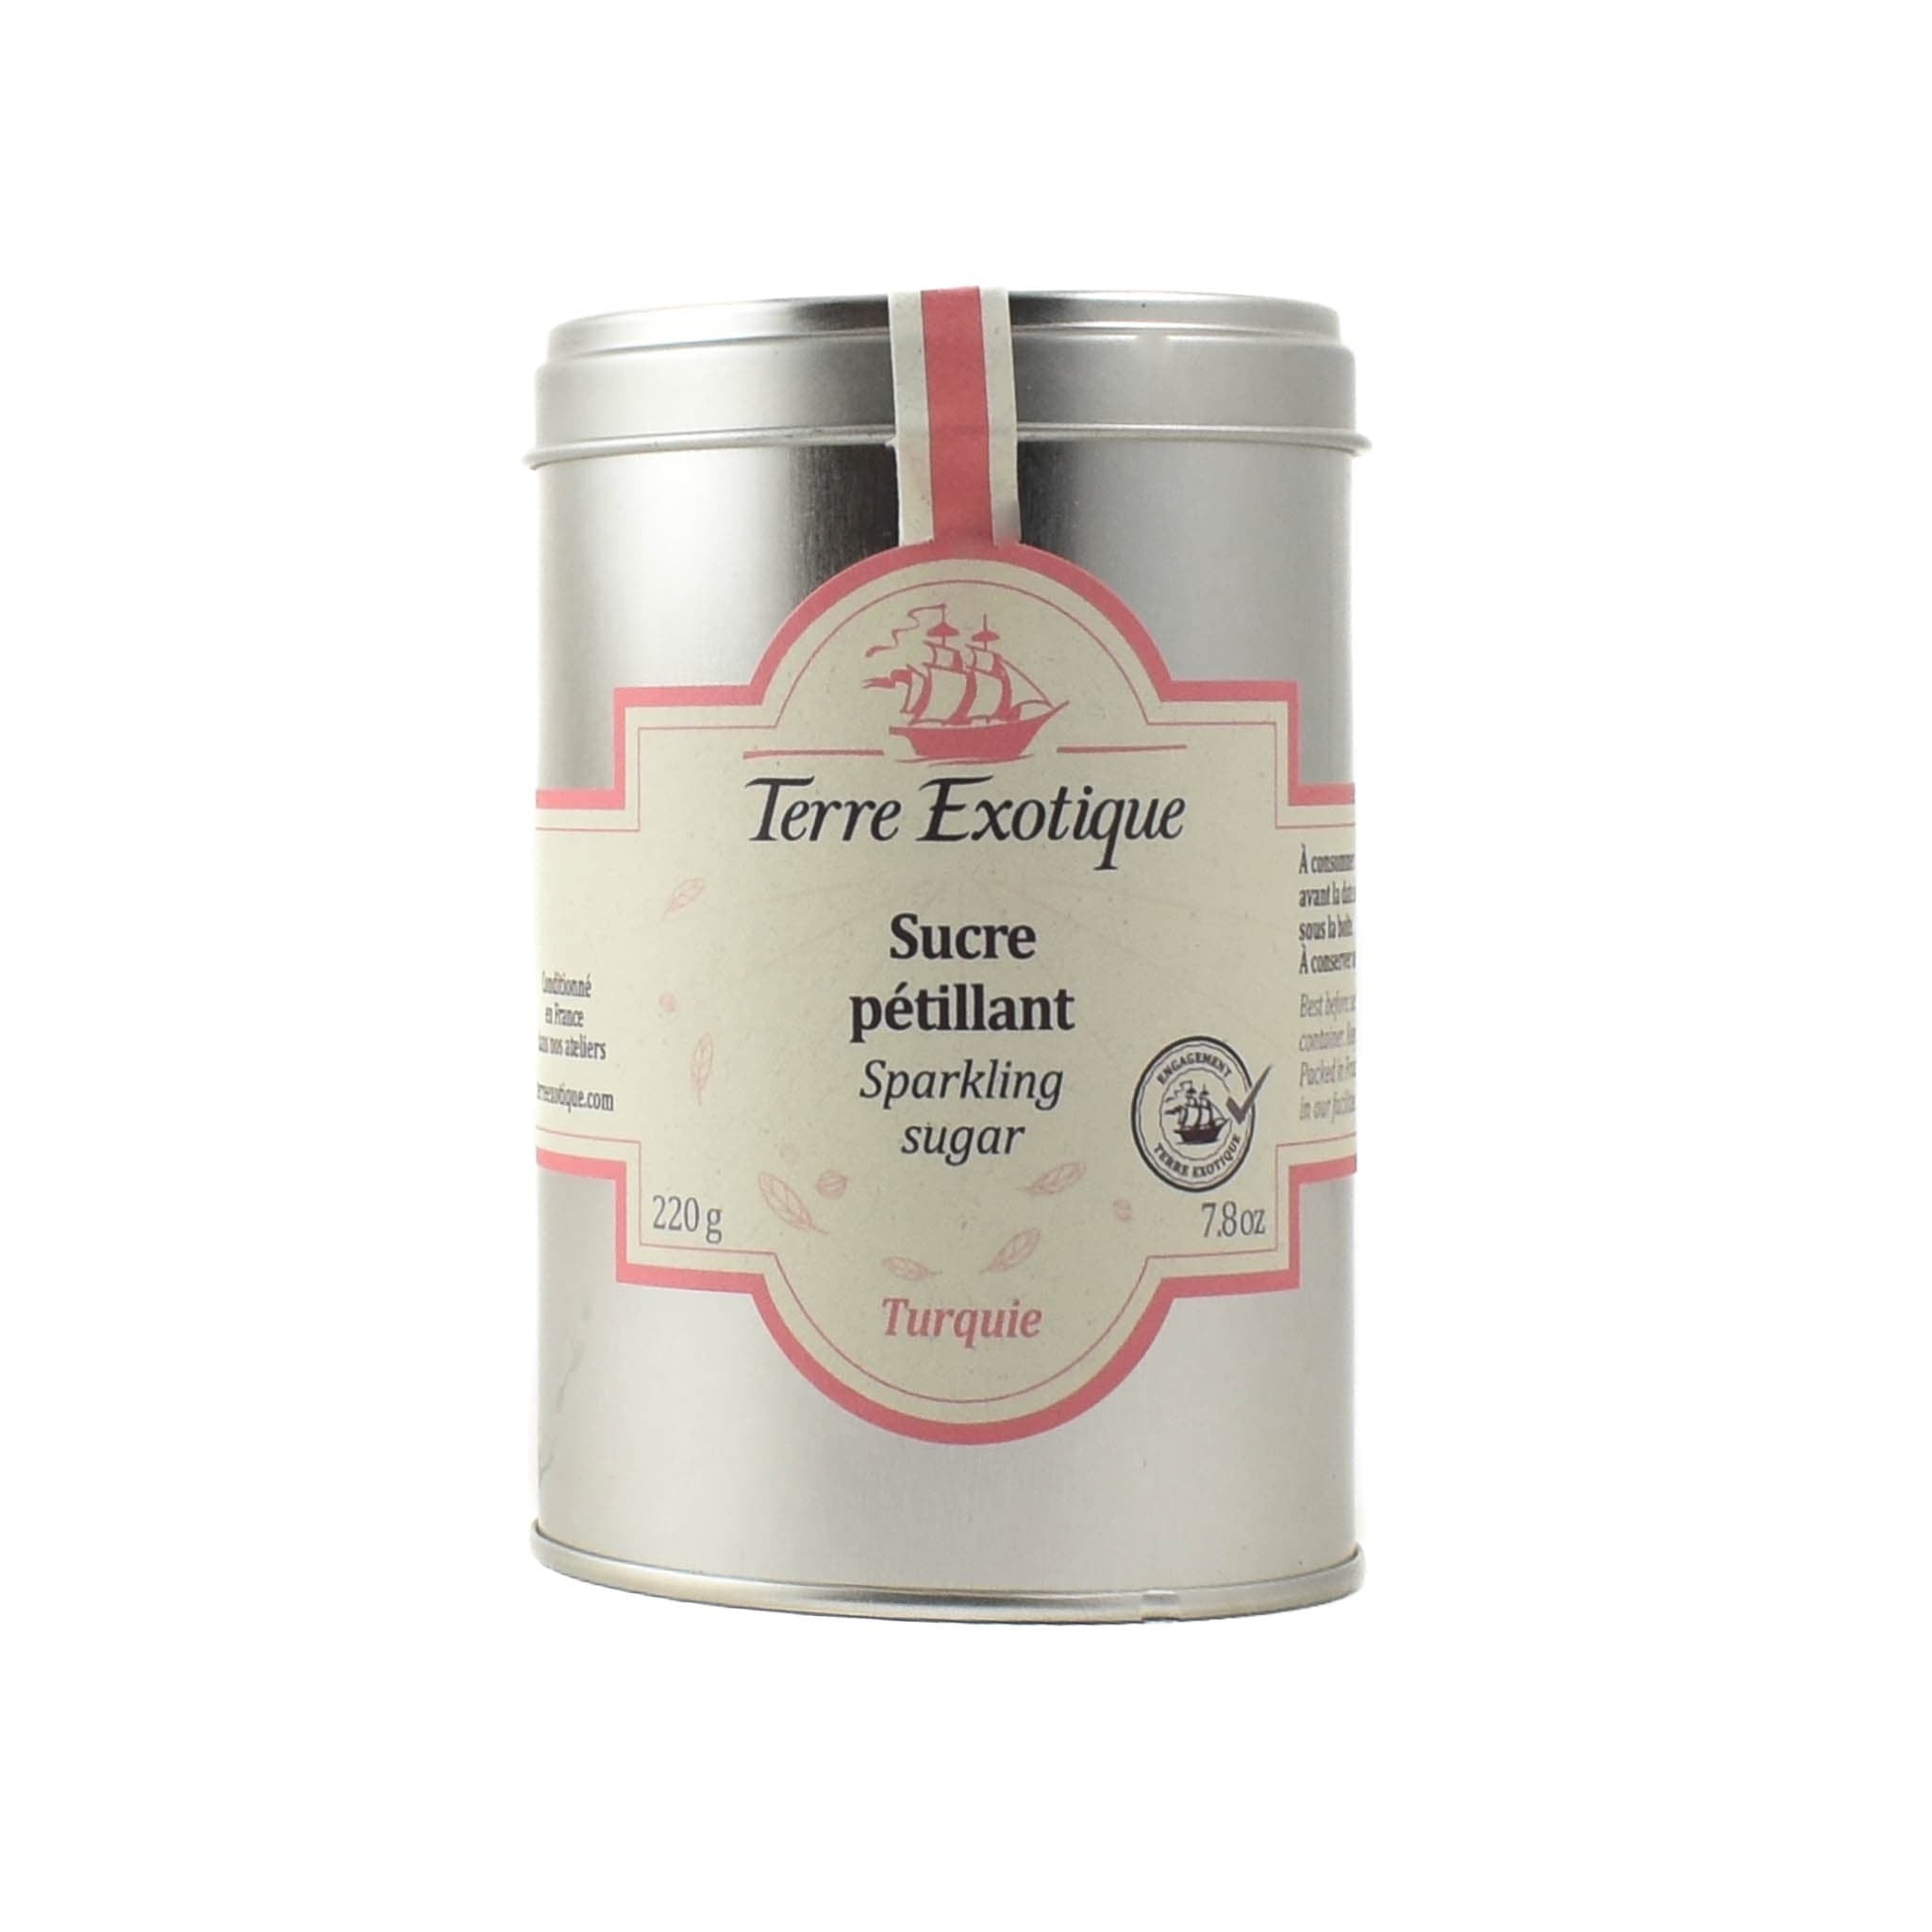 Terre Exotique Sparkling Sugar 220g, (Popping Candy)